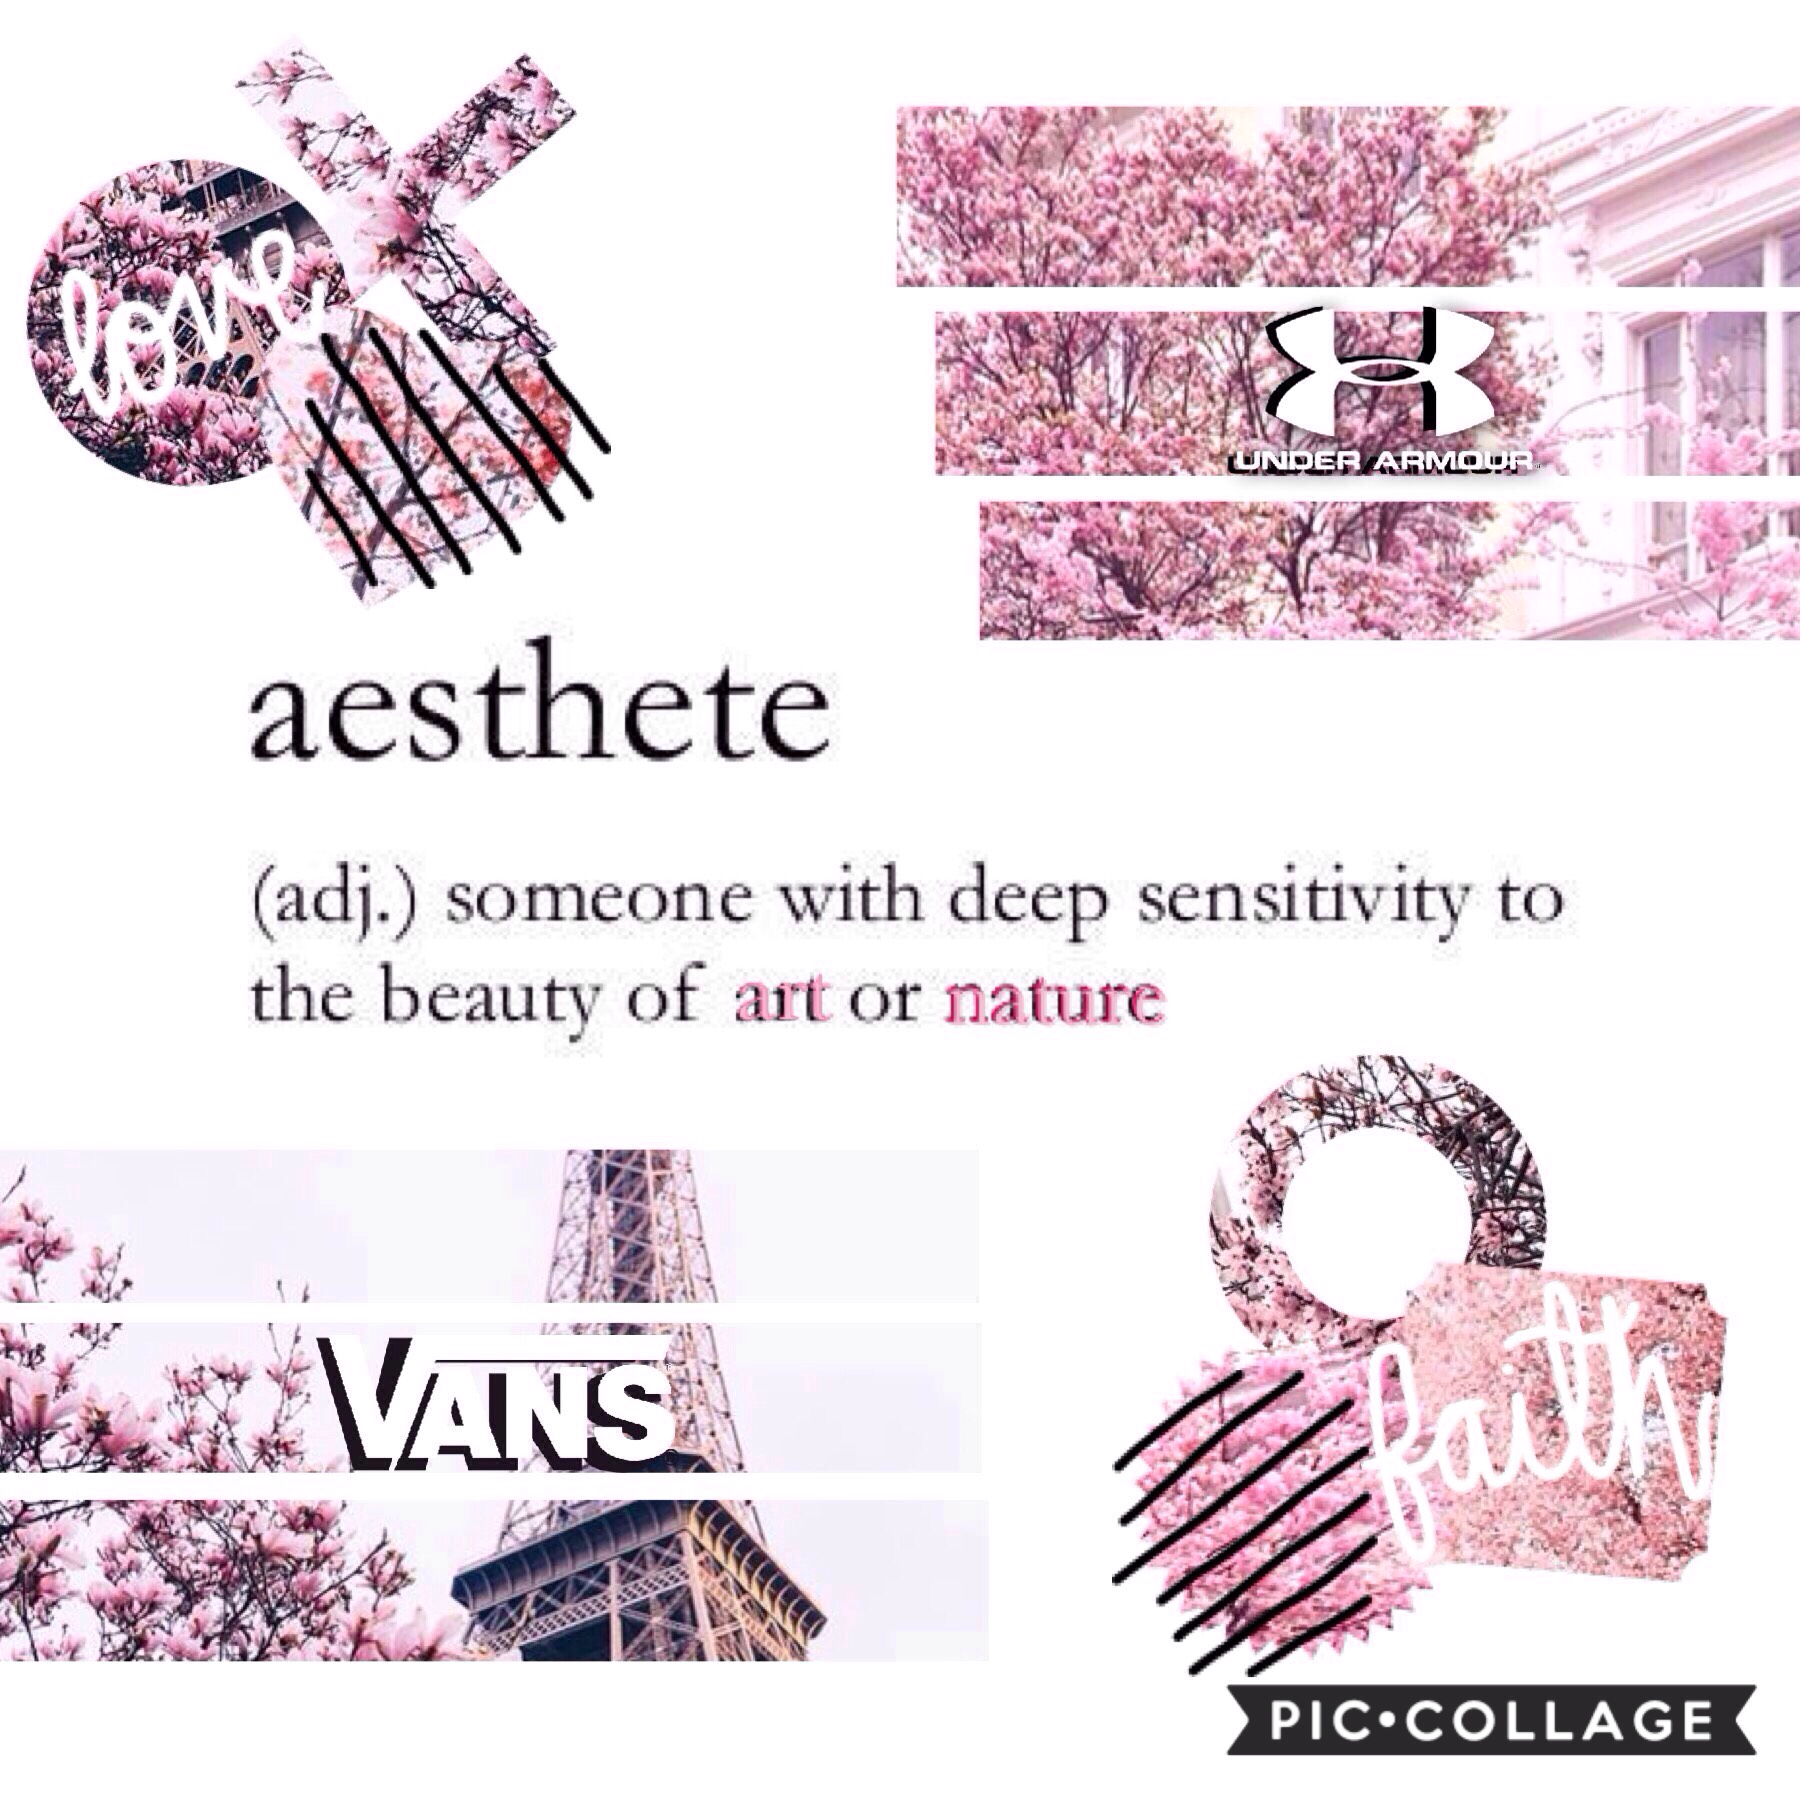 << aesthete >> "someone with deep sensitivity to the beauty of art and nature"🌸🌷 <<1/9/19>>
around last weekend/2 weekends ago I visited a cherry blossom festival (though there weren't many flowers lol)
how's life? You guys at school yet cause this girl h